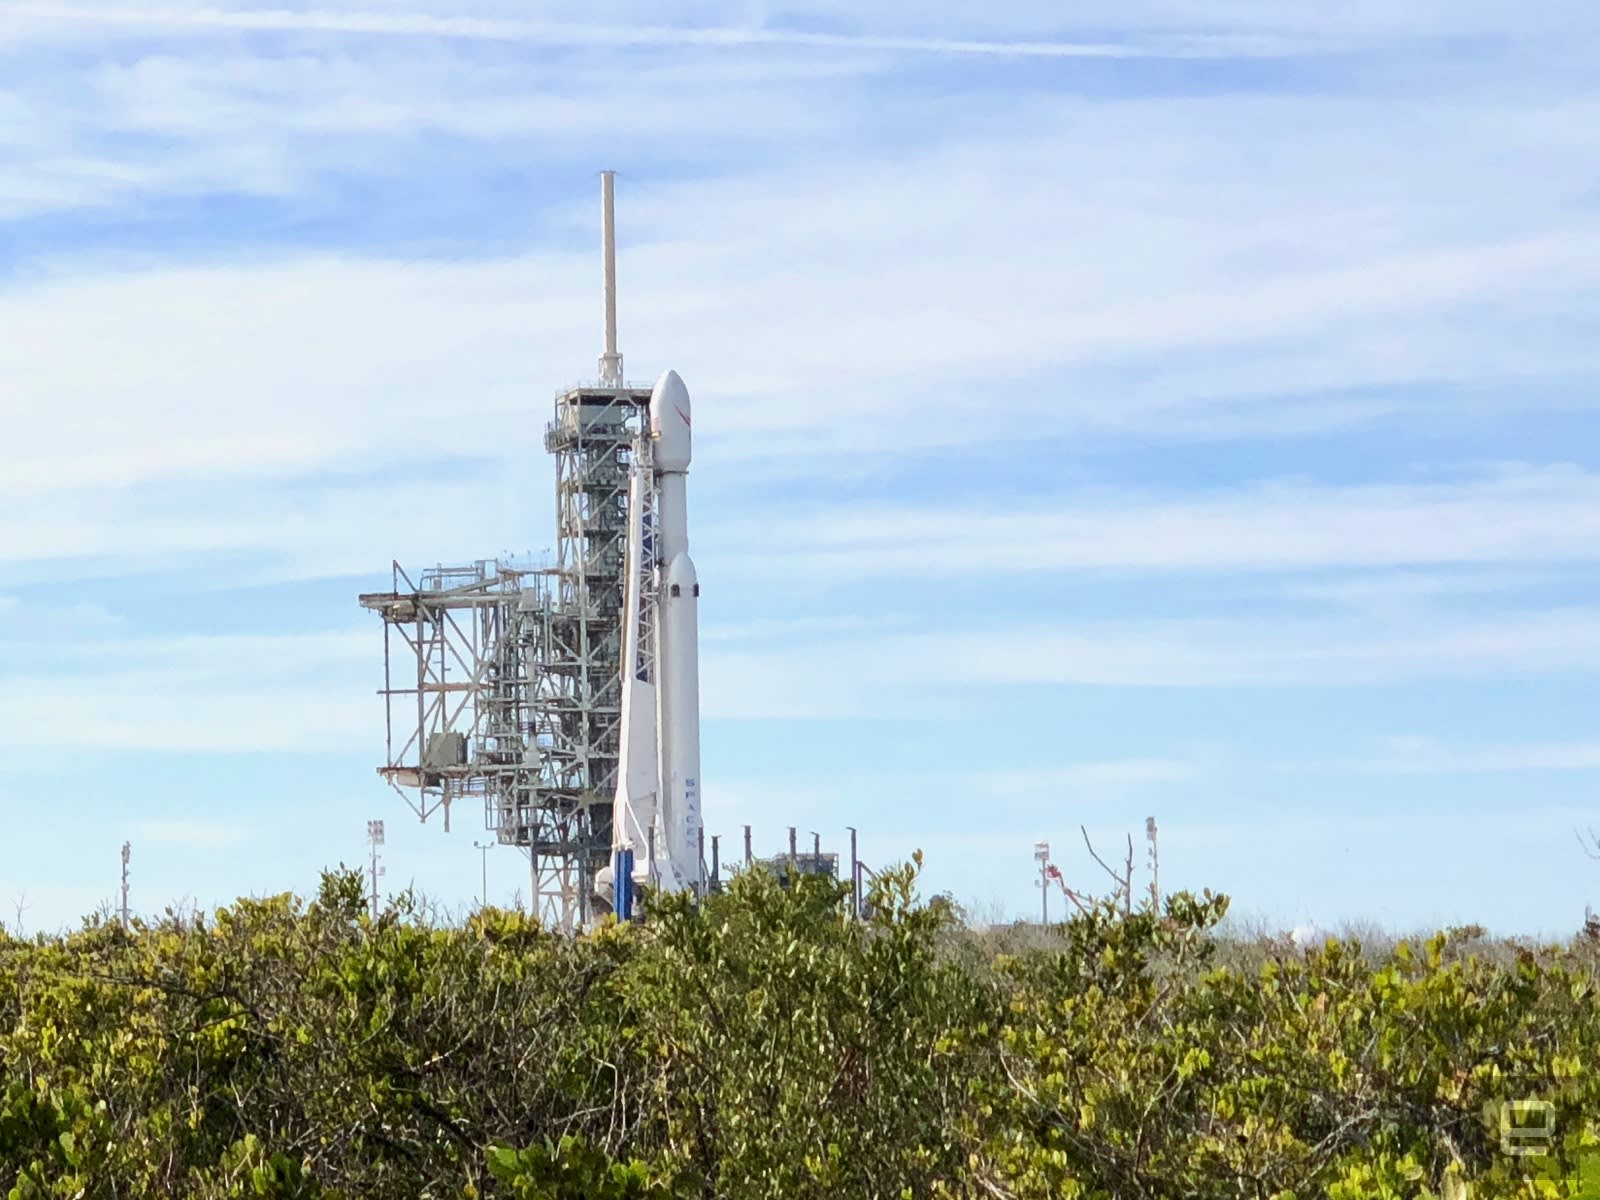 SpaceX gears up for Falcon Heavy's first flight since 2019 with a static fire test | DeviceDaily.com